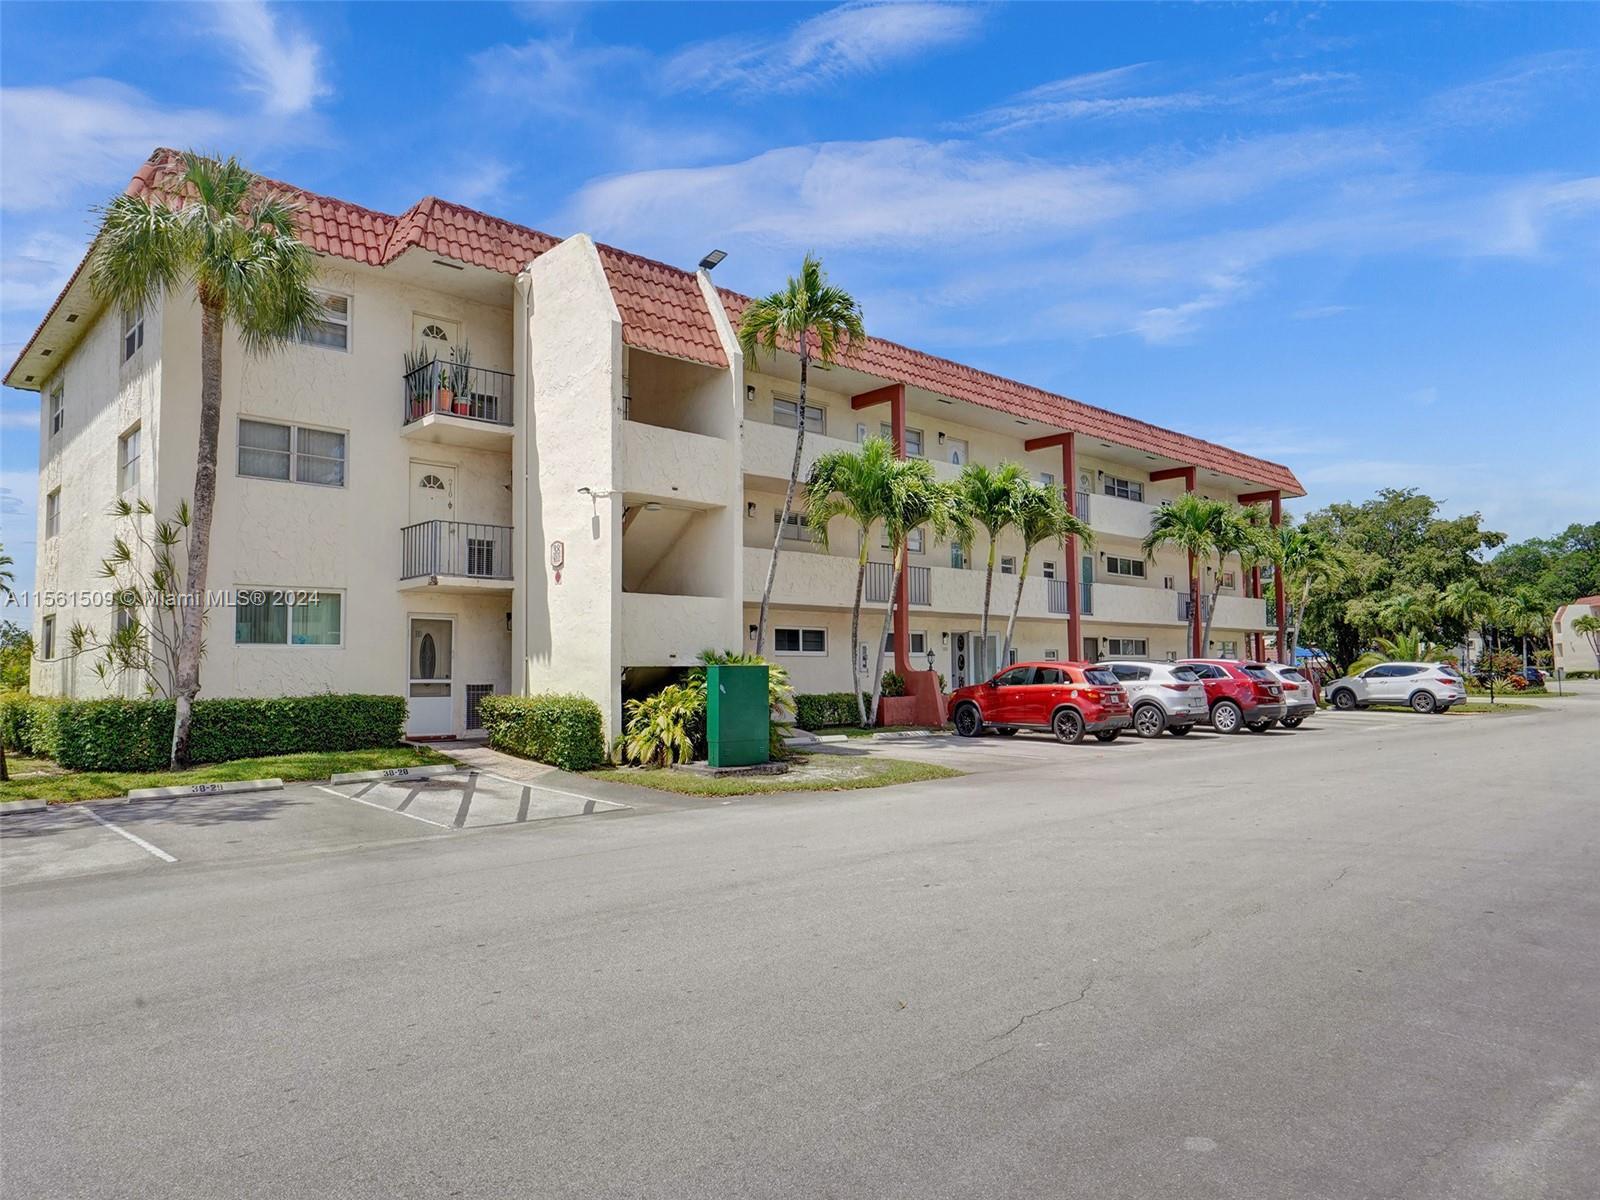 Photo of 411 S Hollybrook Dr #207 in Pembroke Pines, FL